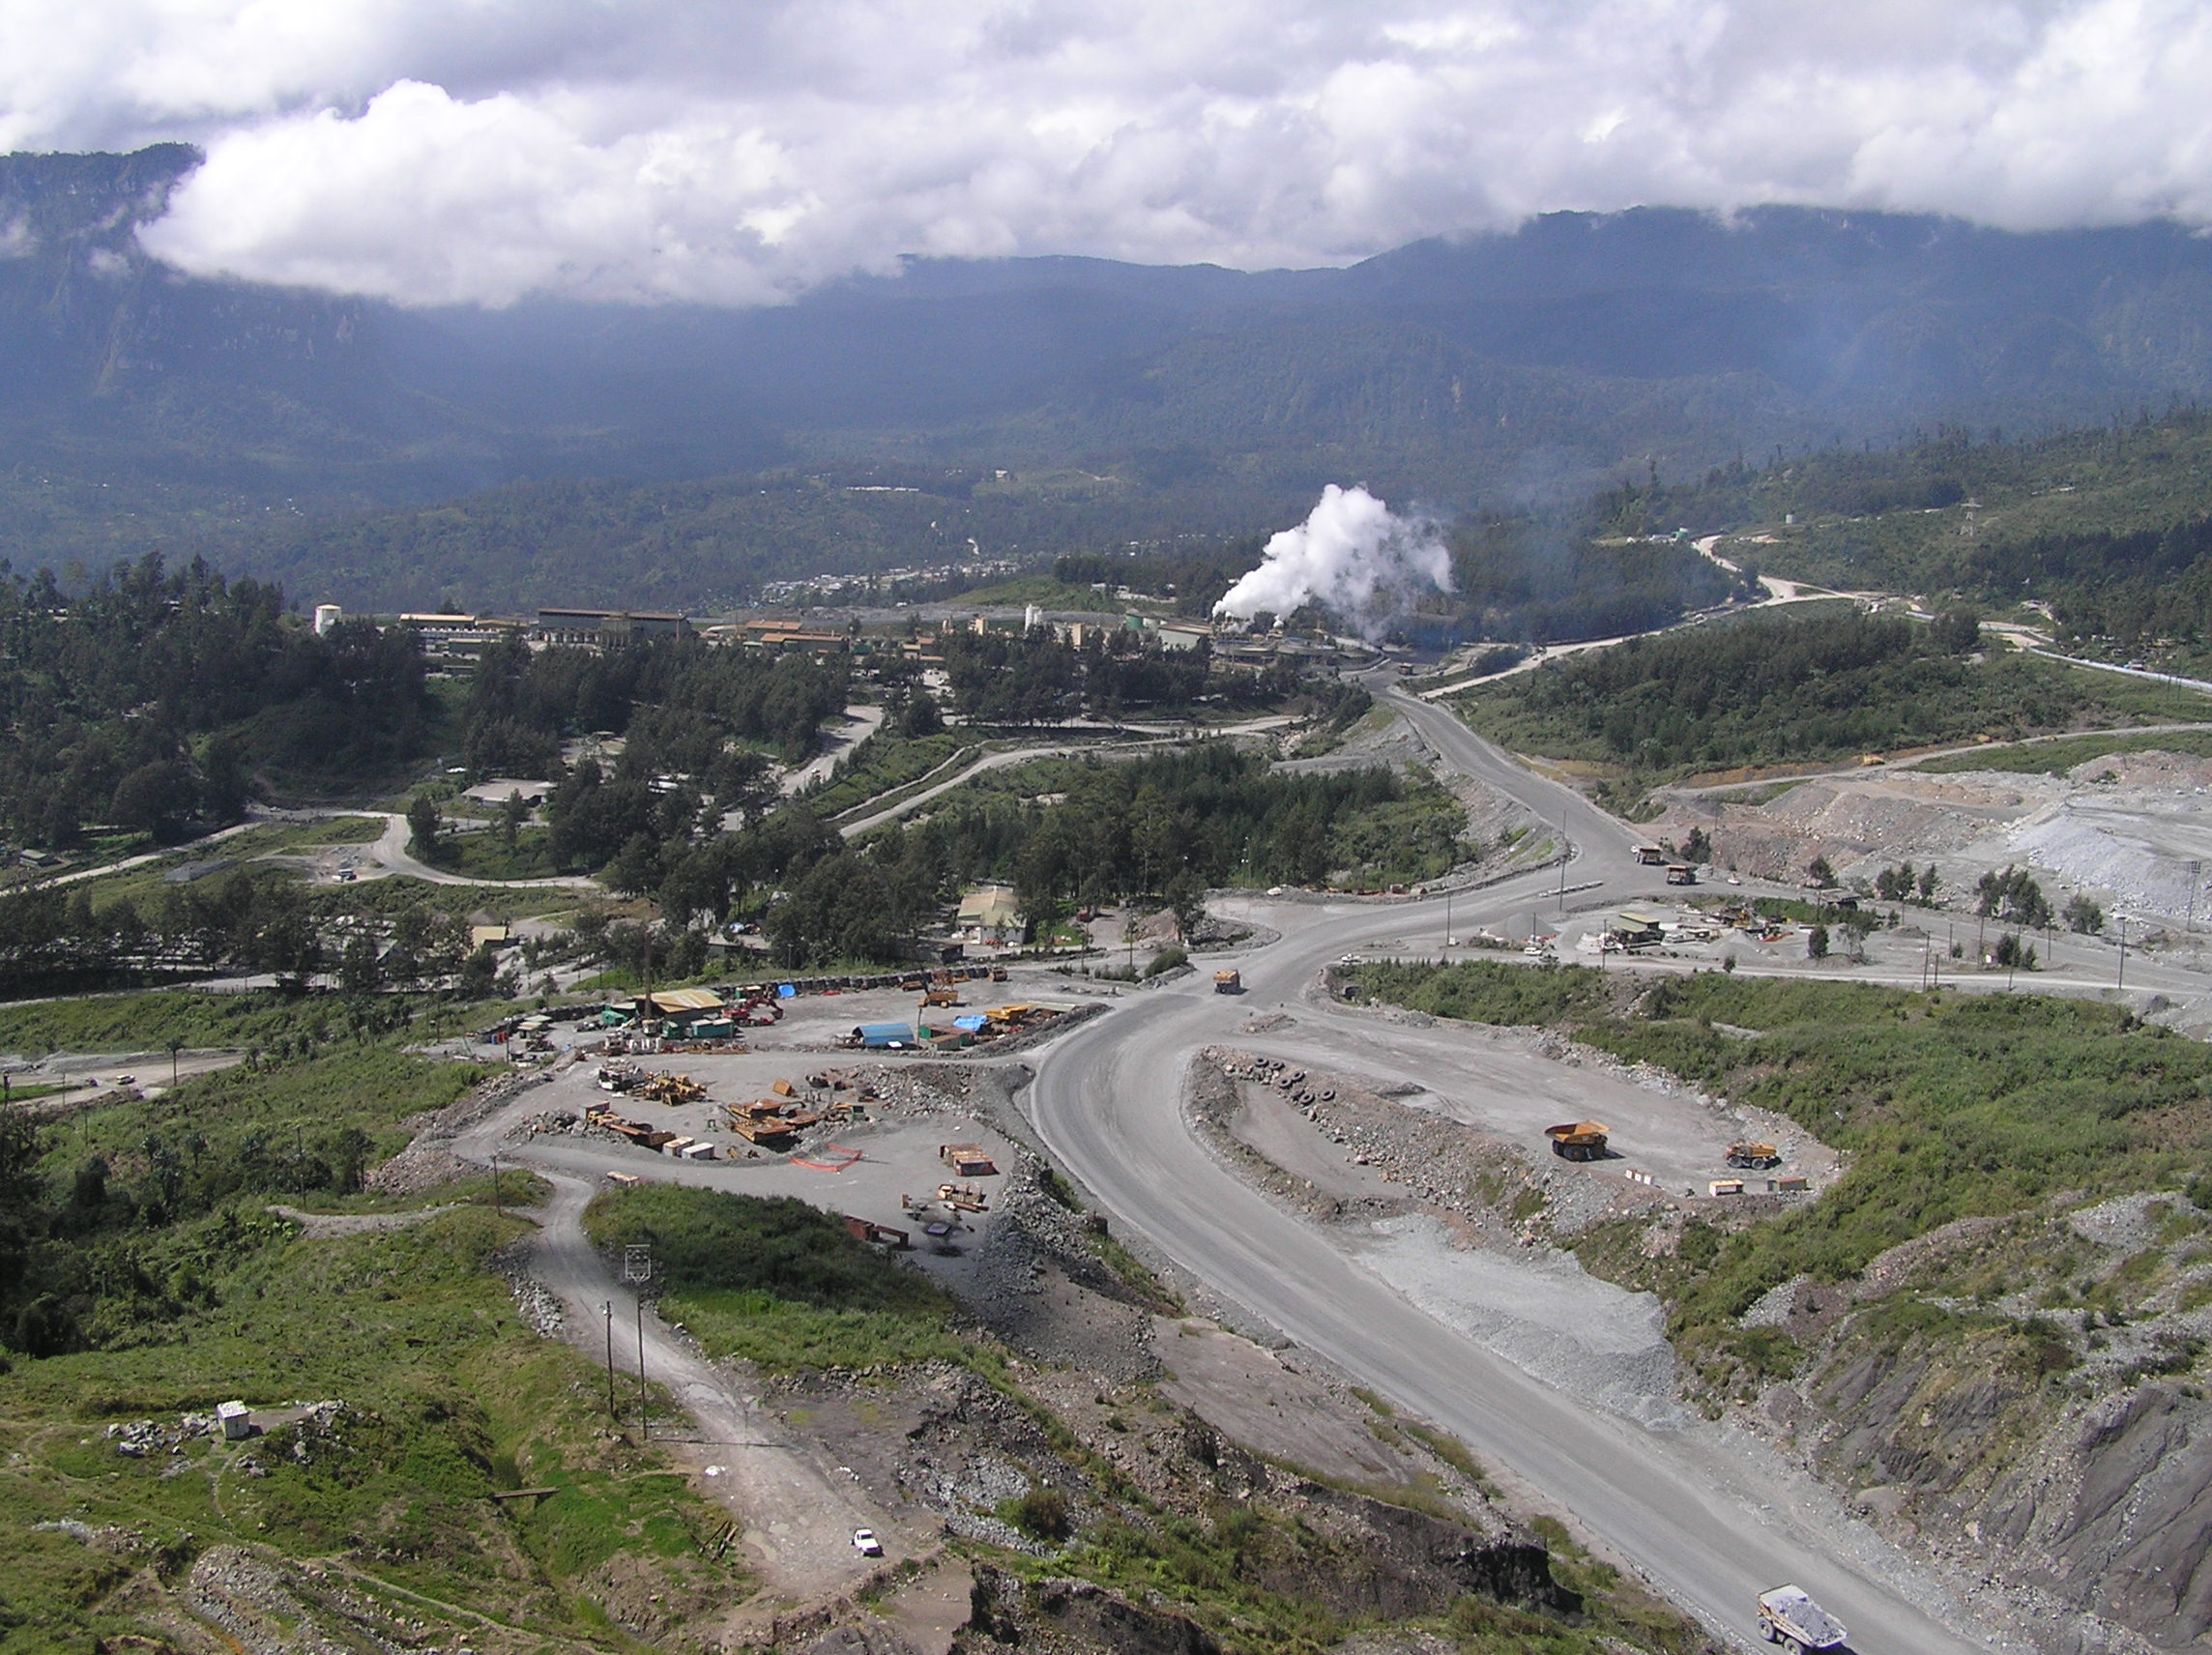 PNG may let Barrick reopen mine if court case dropped